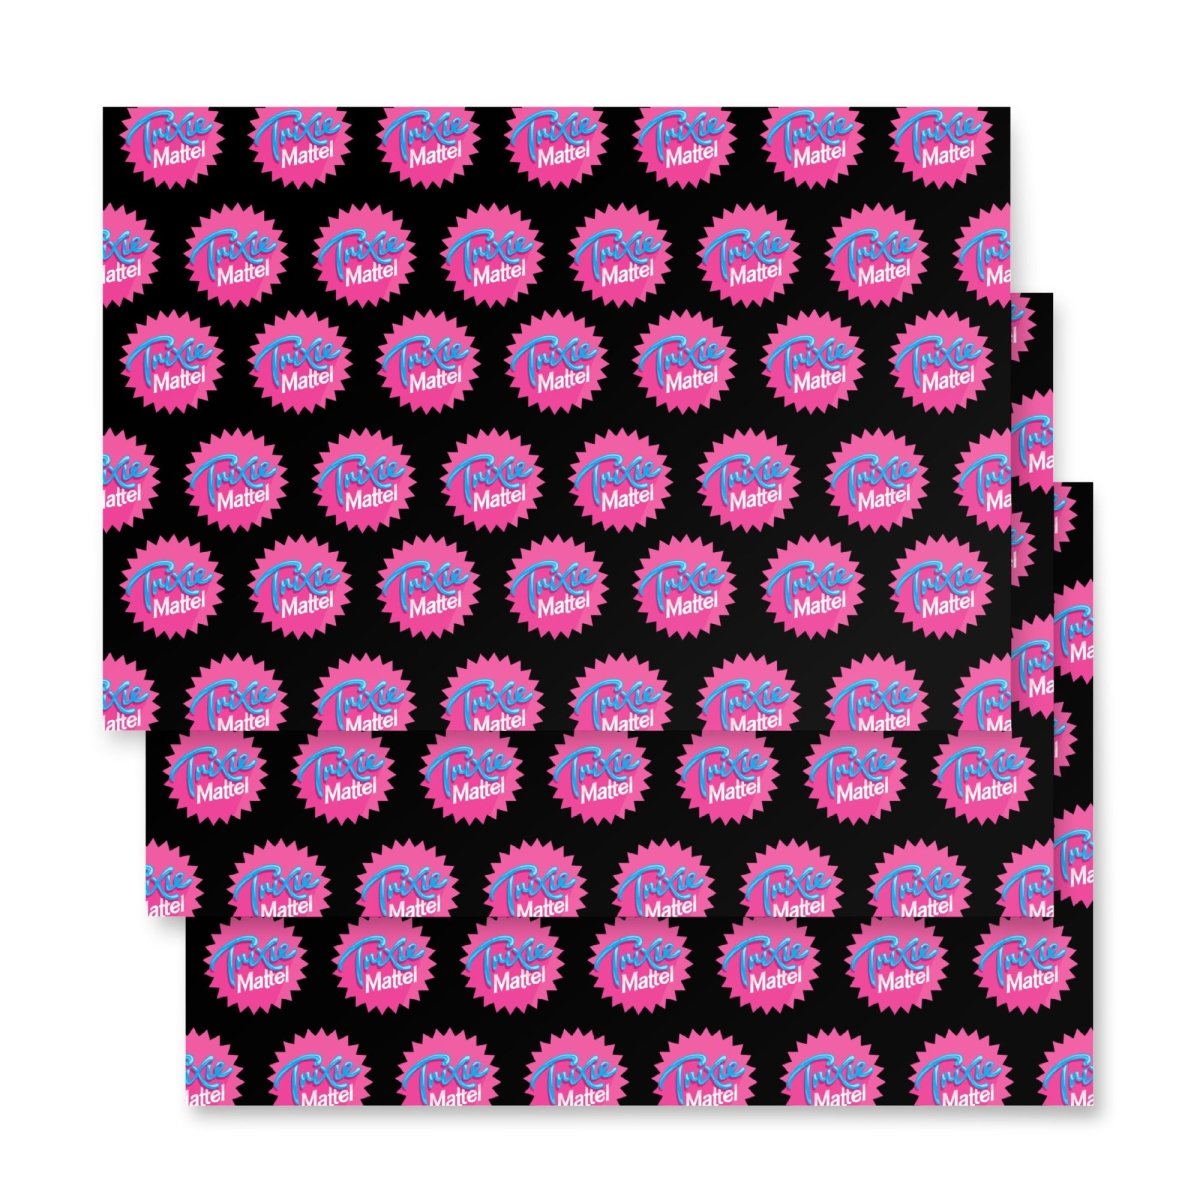 Trixie Mattel - Logo Wrapping paper sheets - dragqueenmerch